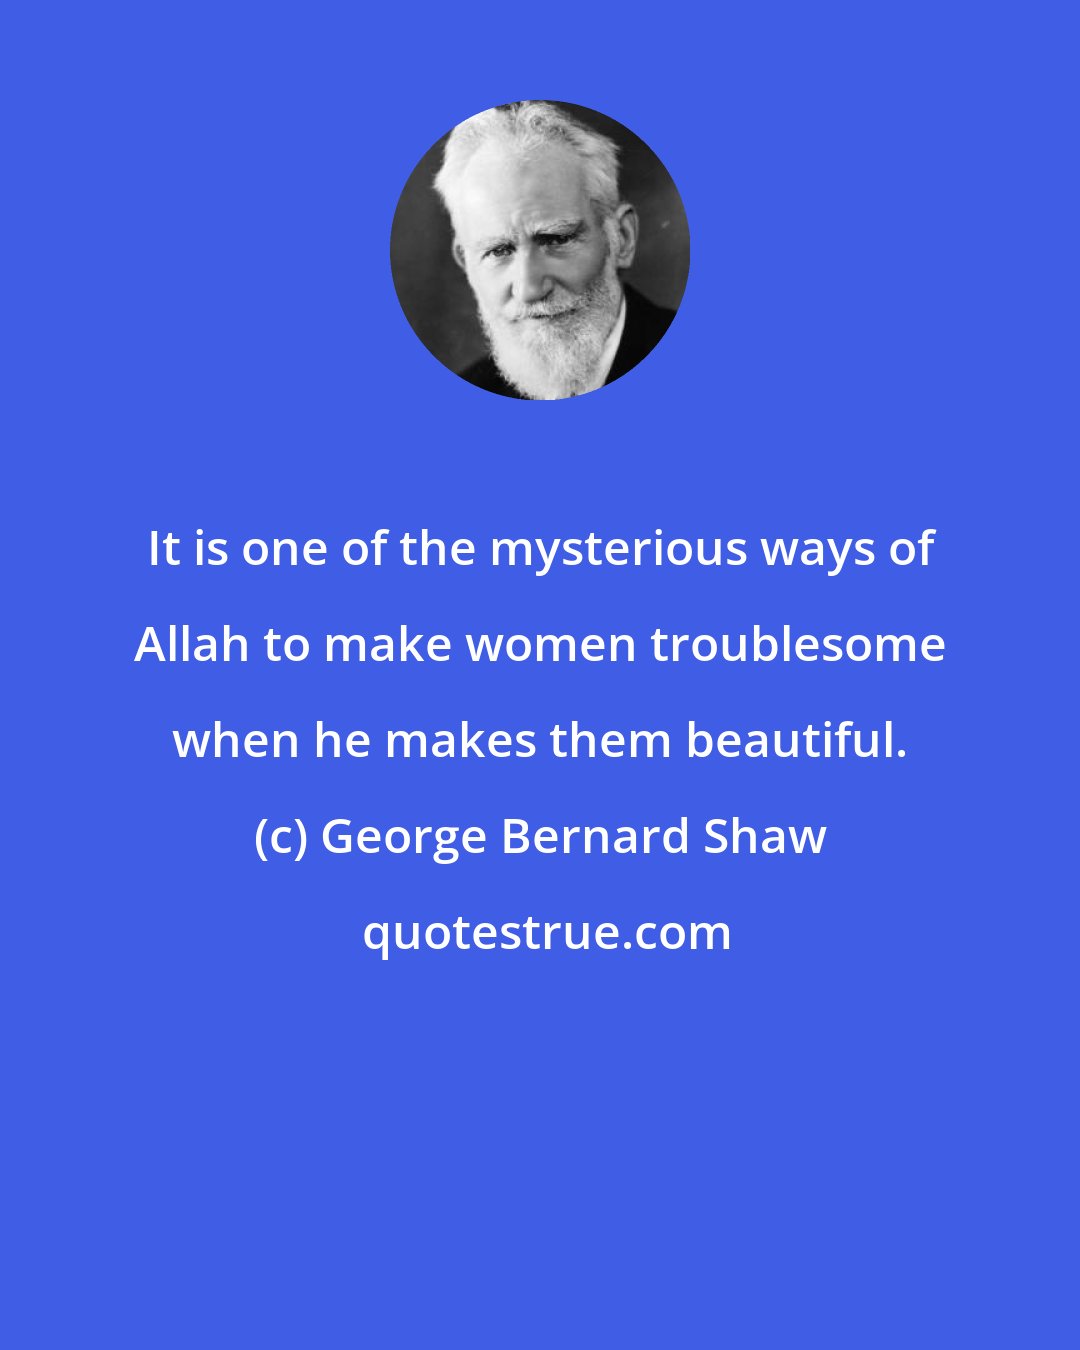 George Bernard Shaw: It is one of the mysterious ways of Allah to make women troublesome when he makes them beautiful.